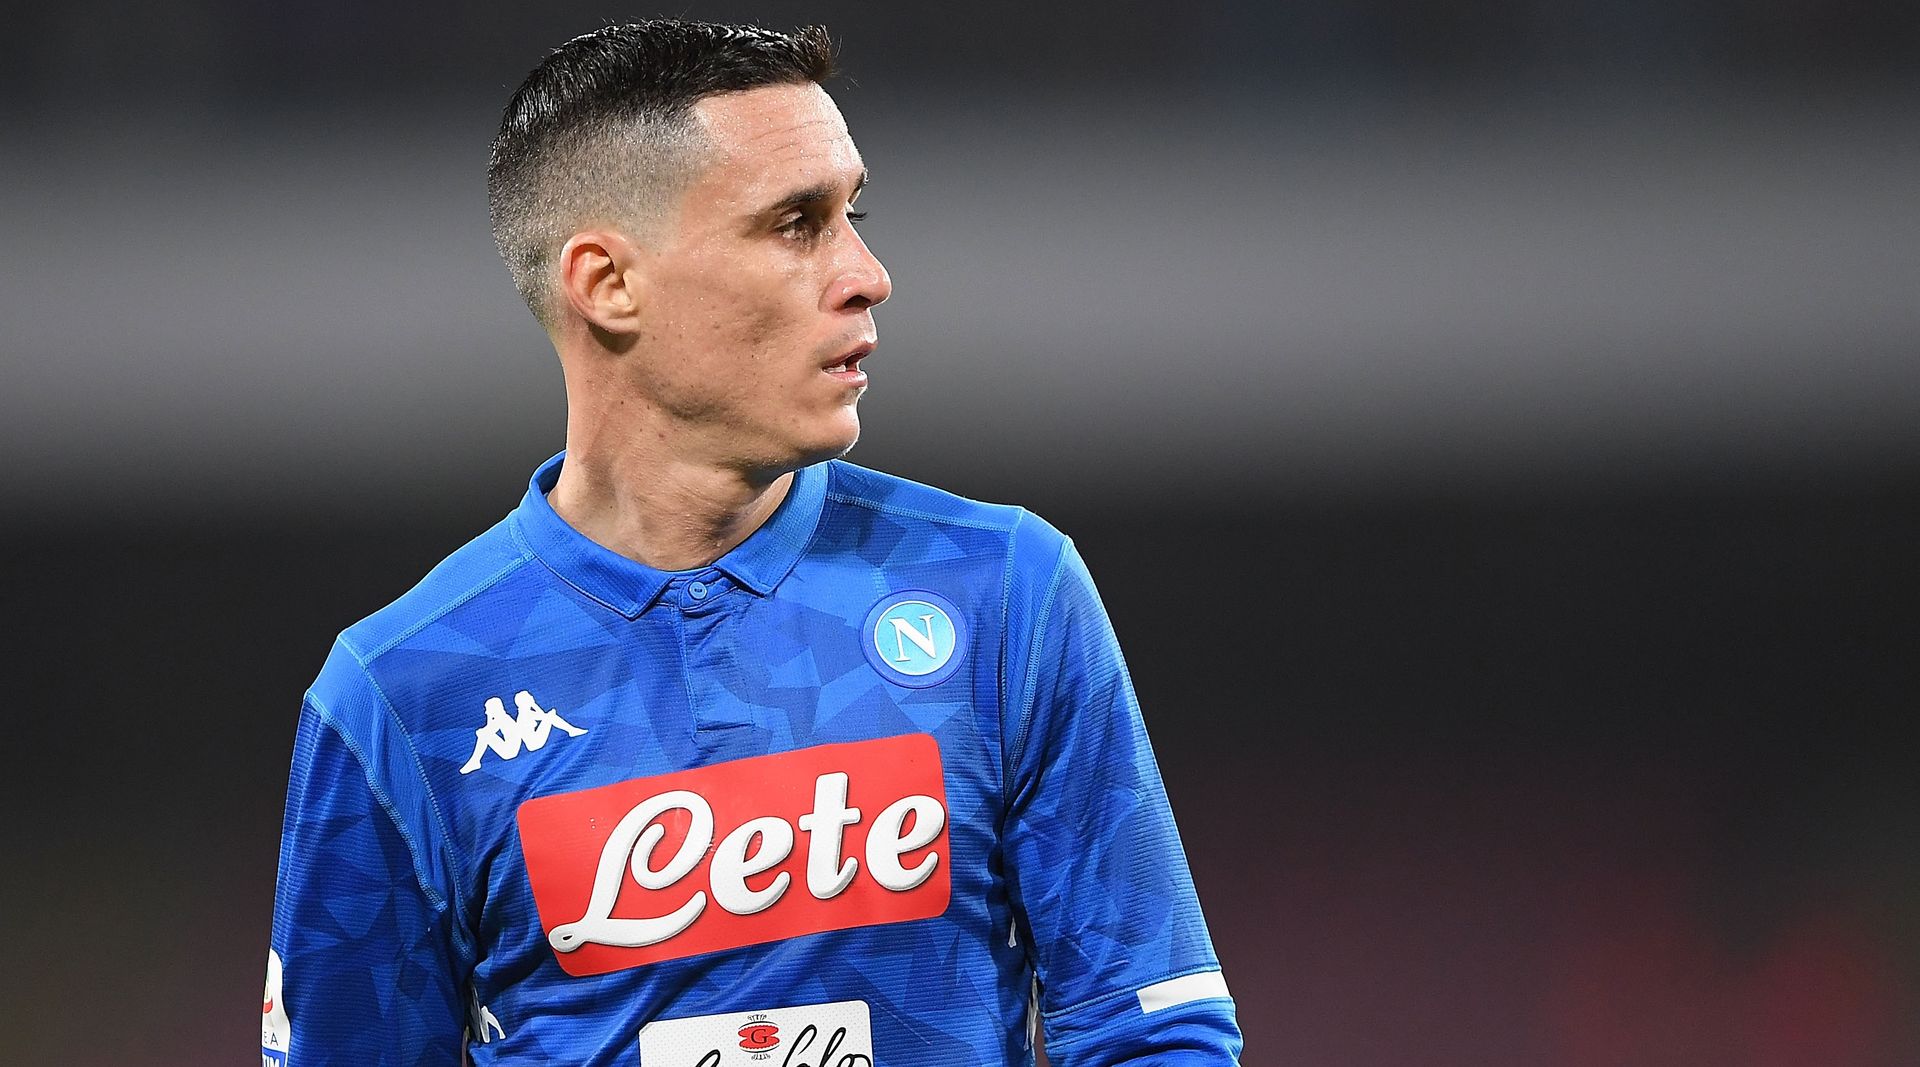 <p>                     Not many Spaniards have carved out a successful Serie A career, but Jose Callejon did exactly that after swapping Real Madrid for Napoli in 2013.                   </p>                                      <p>                     The Italian top flight’s leading provider with 13 assists in 2016/17, Callejon also reached double figures for league goals in four separate seasons with the Partenopei.                   </p>